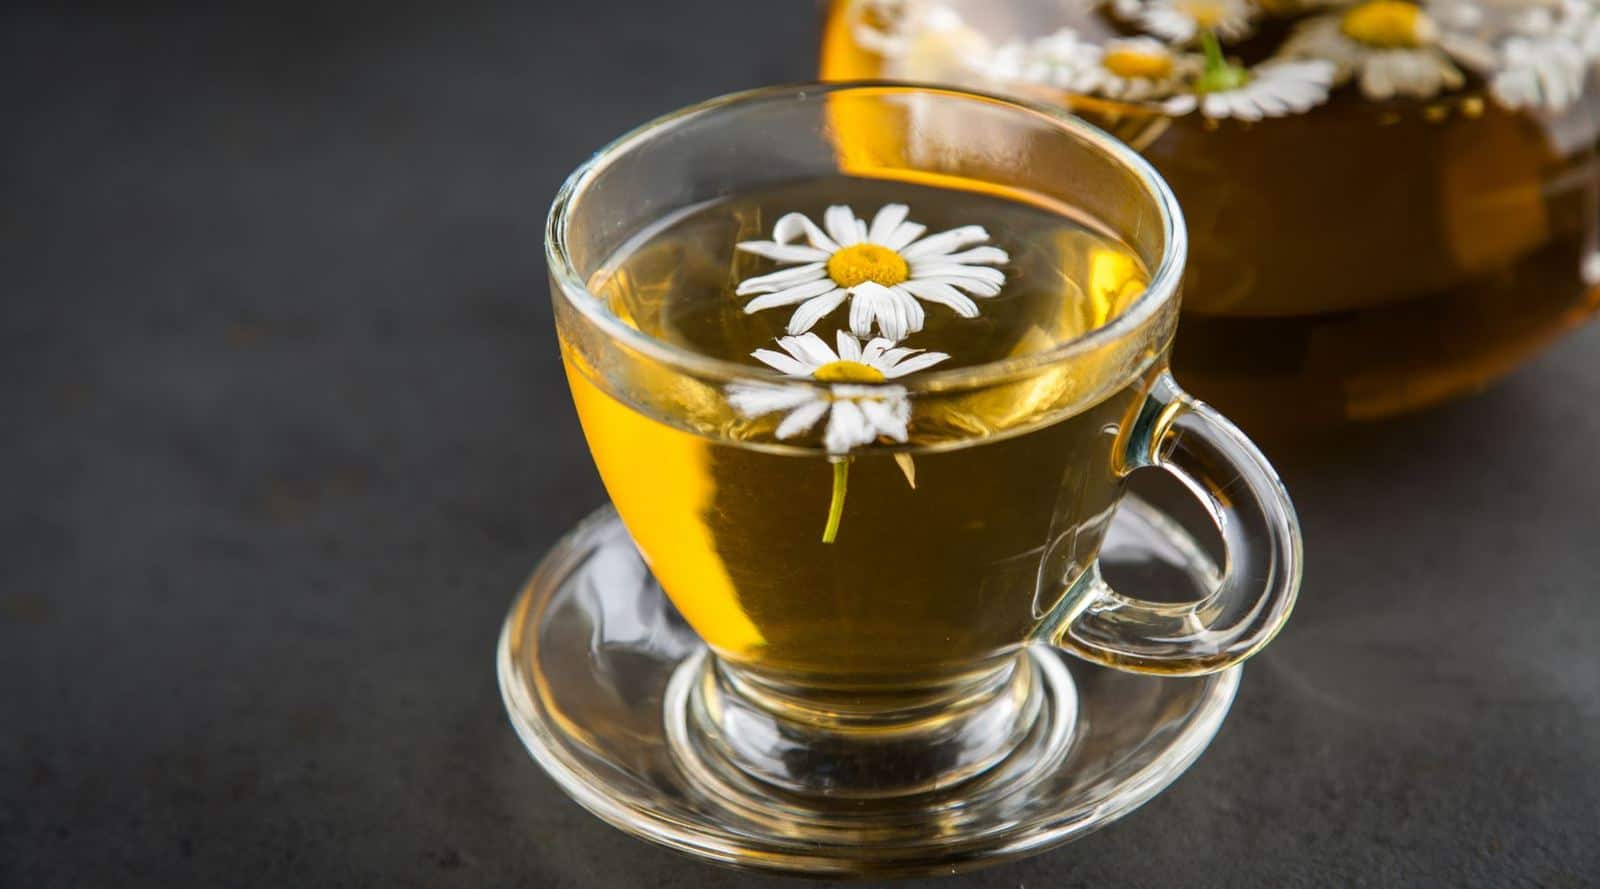 different ways in which chamomile tea benefits your health, skin and hair